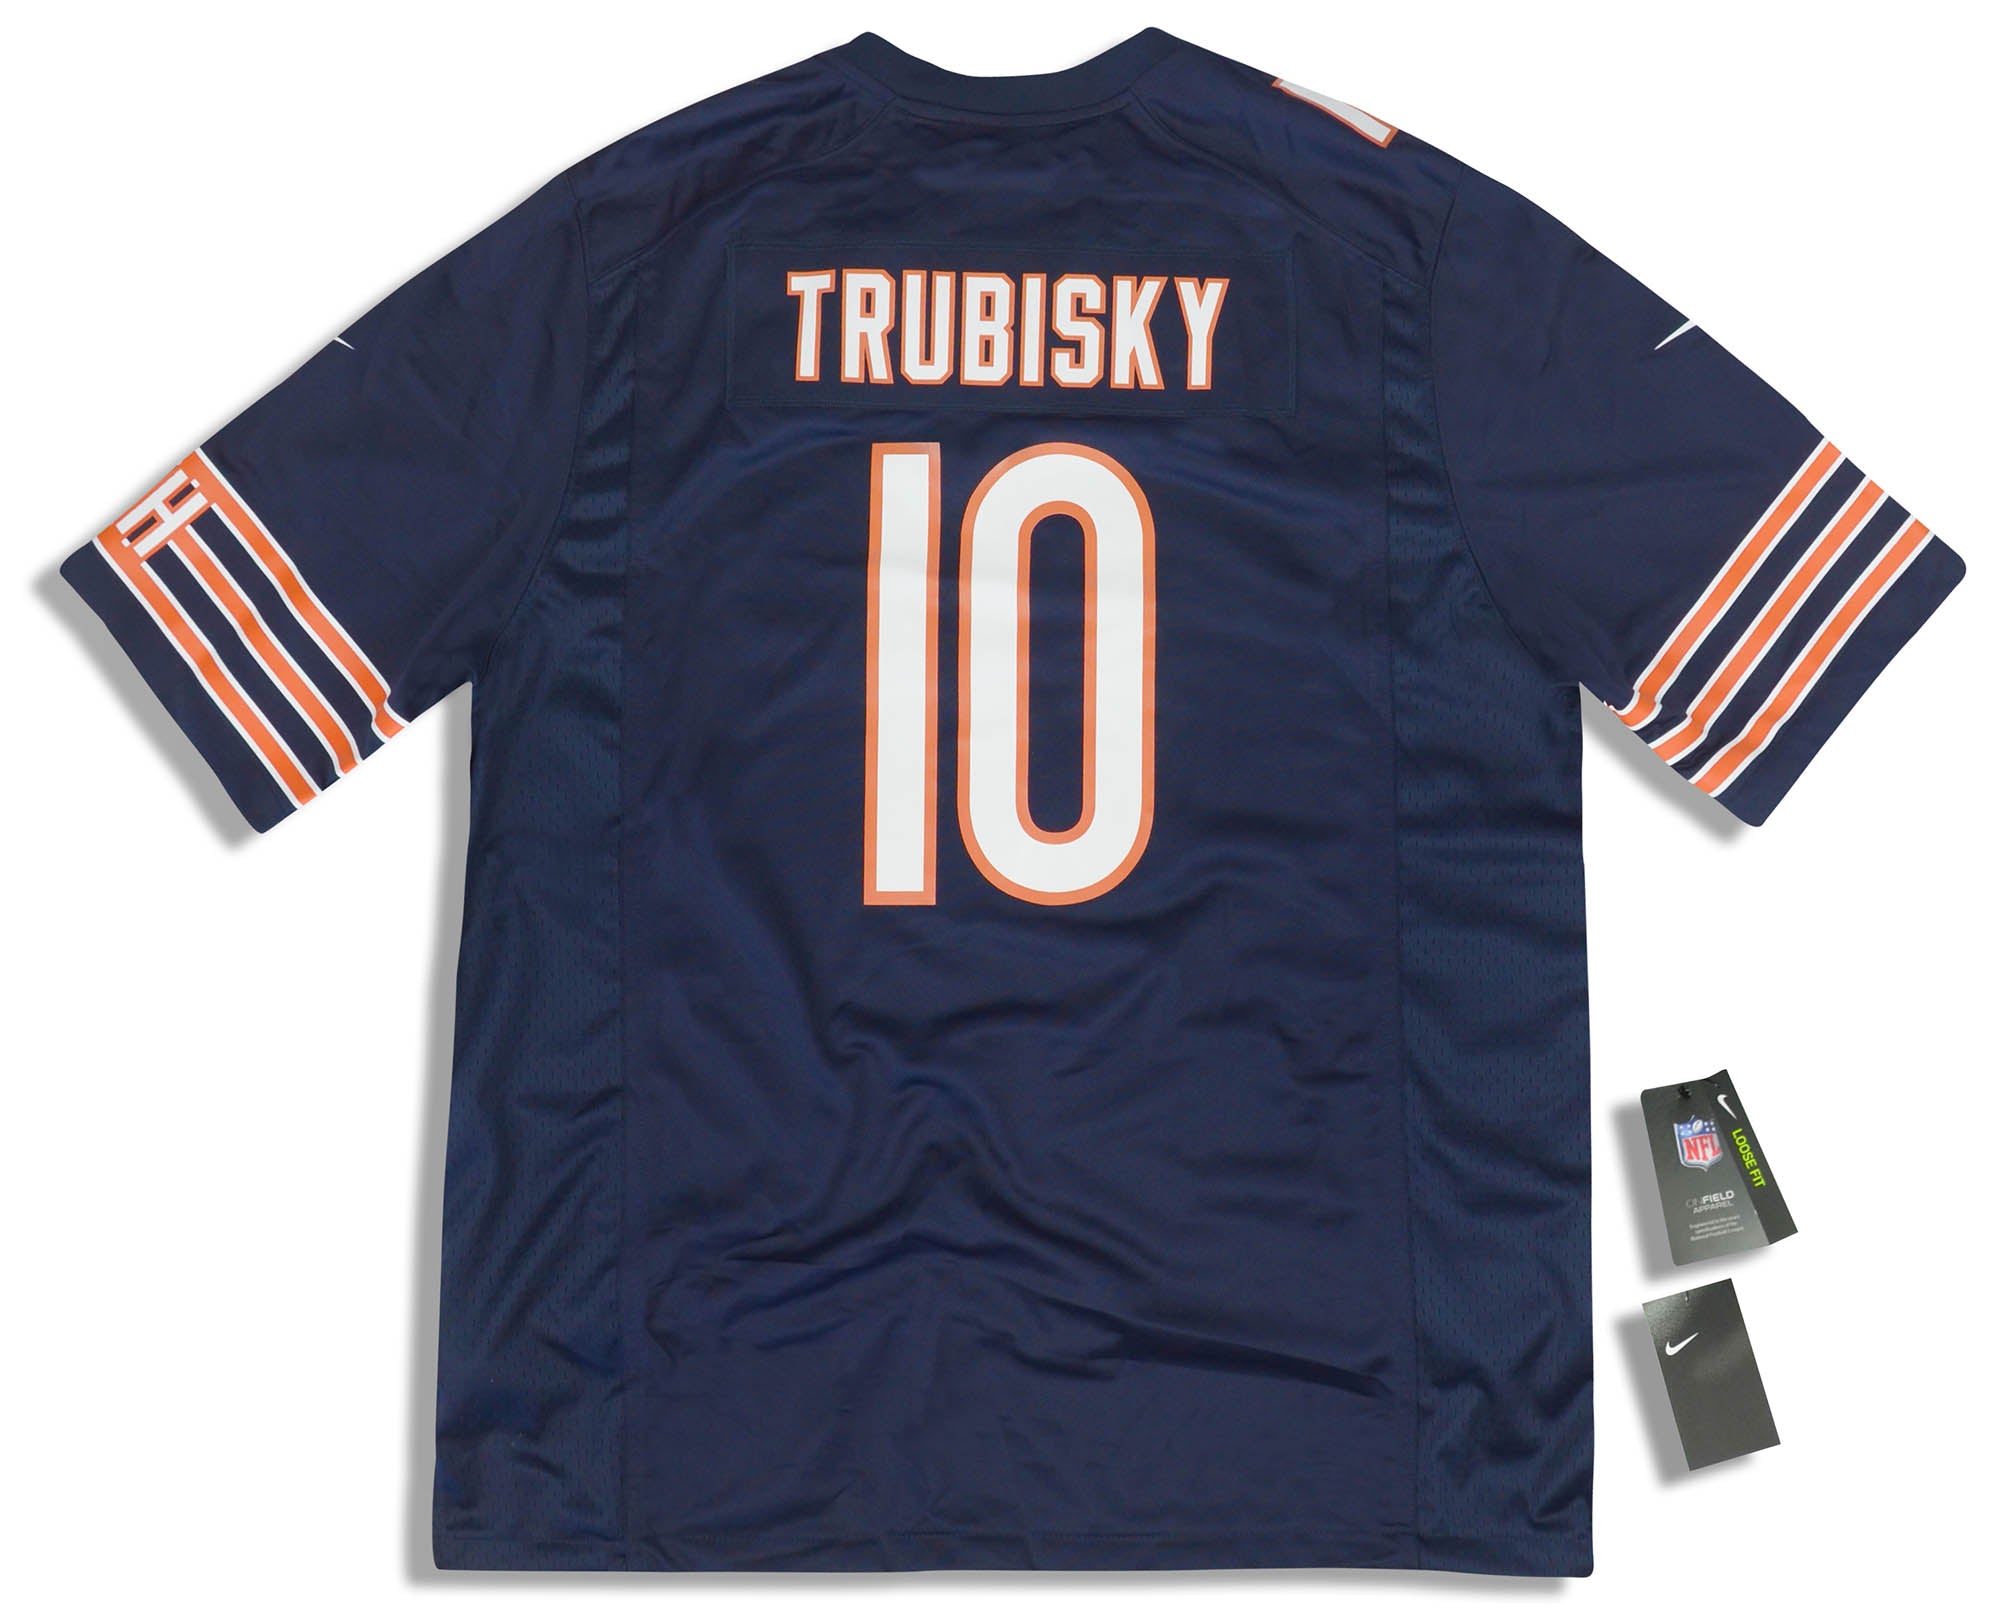 2018-19 CHICAGO BEARS TRUBISKY #10 NIKE GAME JERSEY (HOME) XL - W/TAGS